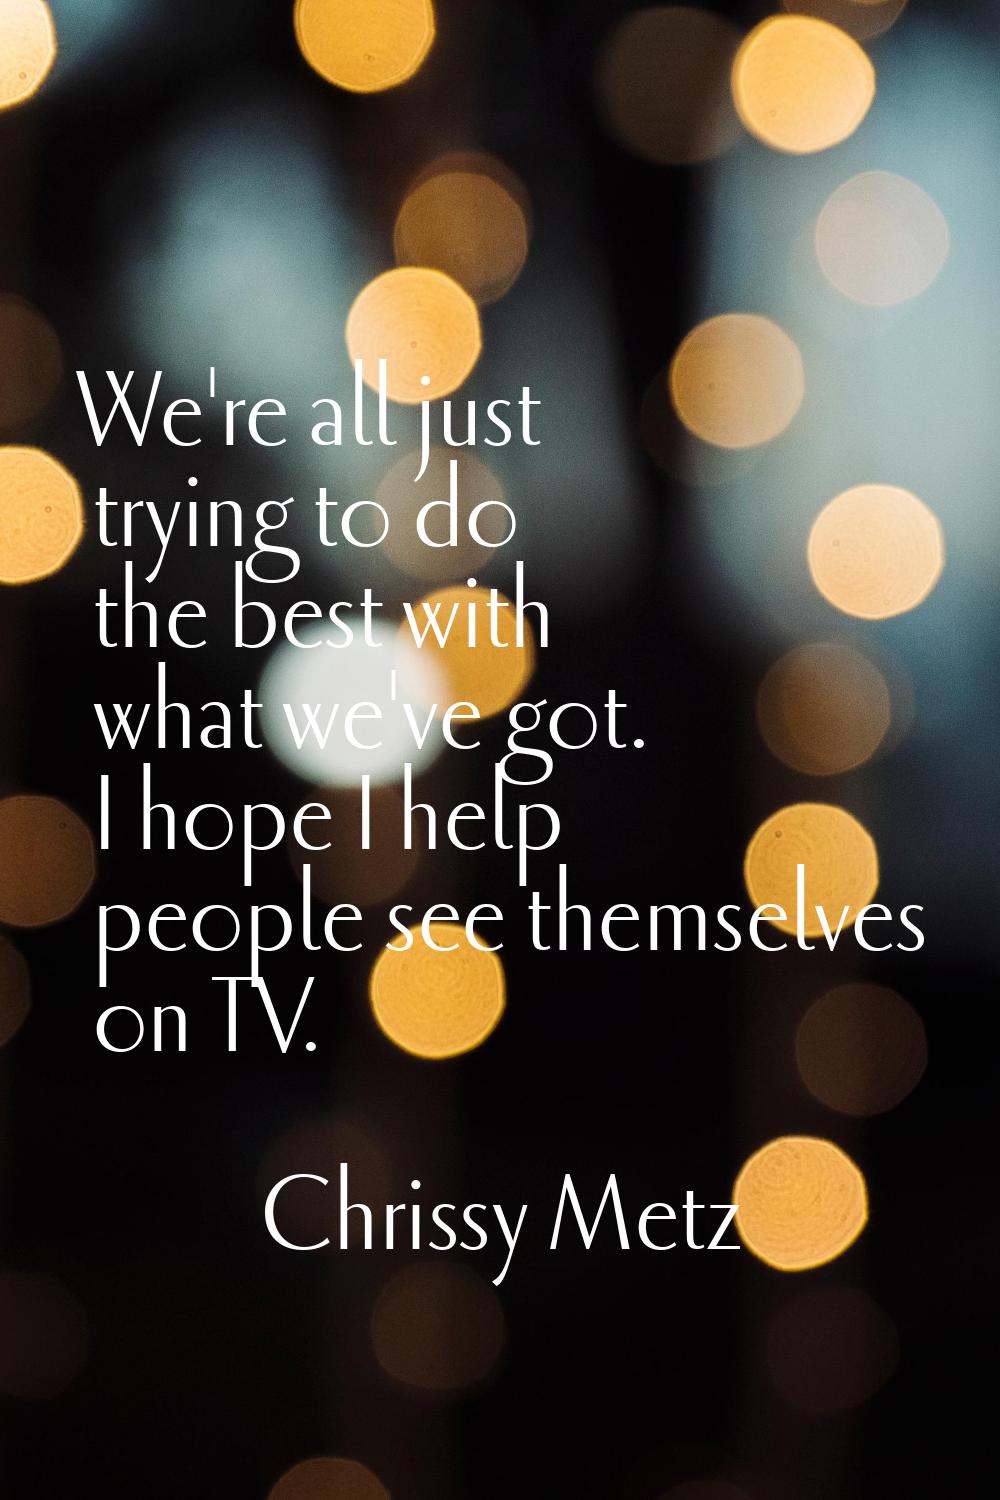 We're all just trying to do the best with what we've got. I hope I help people see themselves on TV